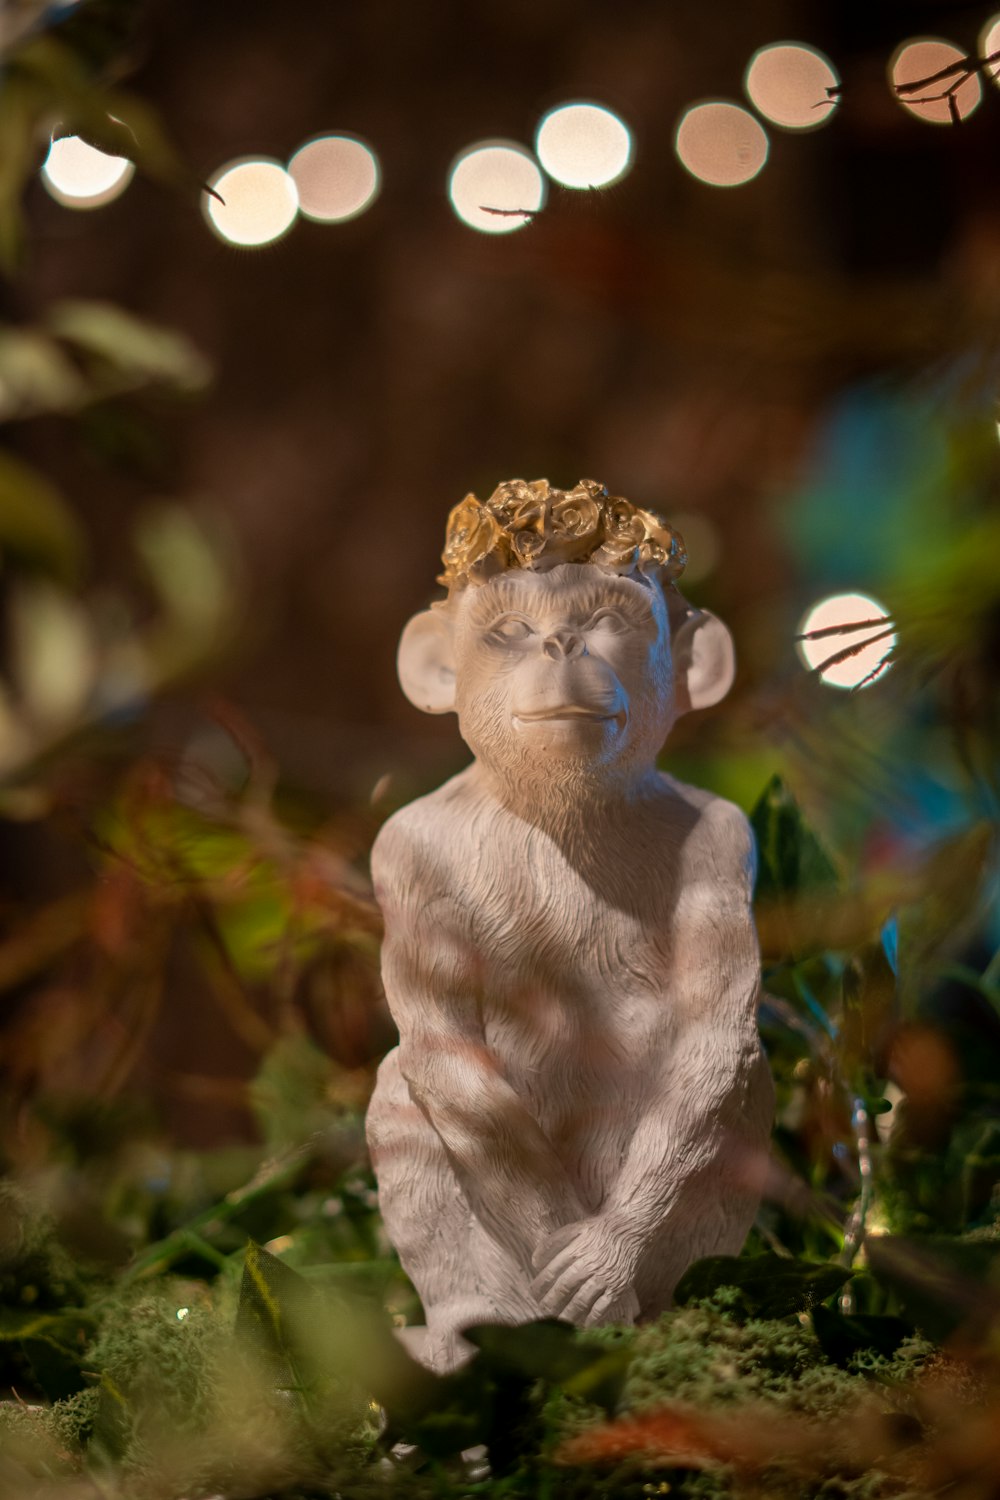 a statue of a monkey with a crown on his head